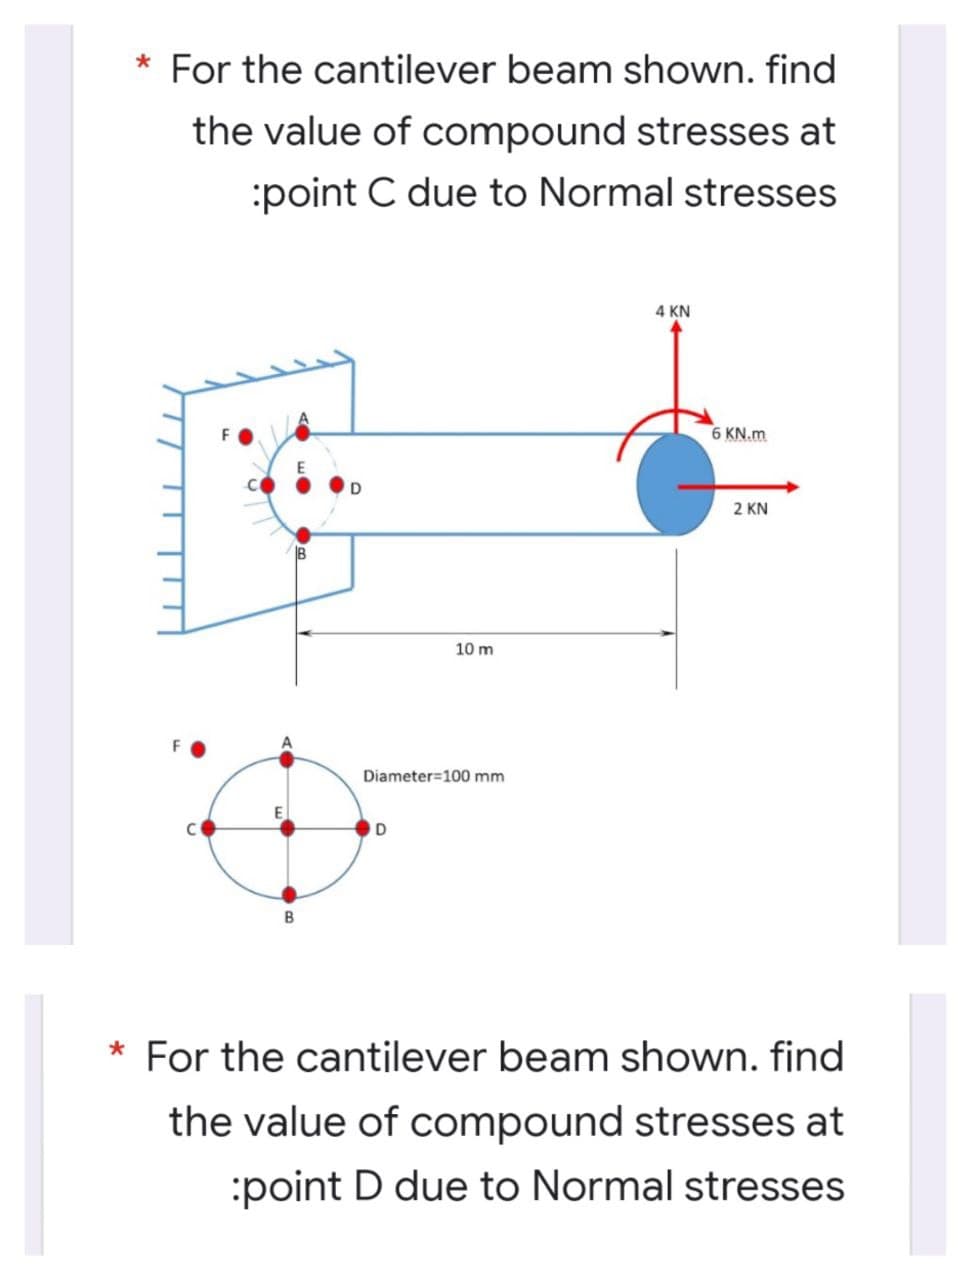 * For the cantilever beam shown. find
the value of compound stresses at
:point C due to Normal stresses
4 KN
6 KN.m
2 KN
10 m
Diameter=100 mm
D
For the cantilever beam shown. find
the value of compound stresses at
:point D due to Normal stresses
